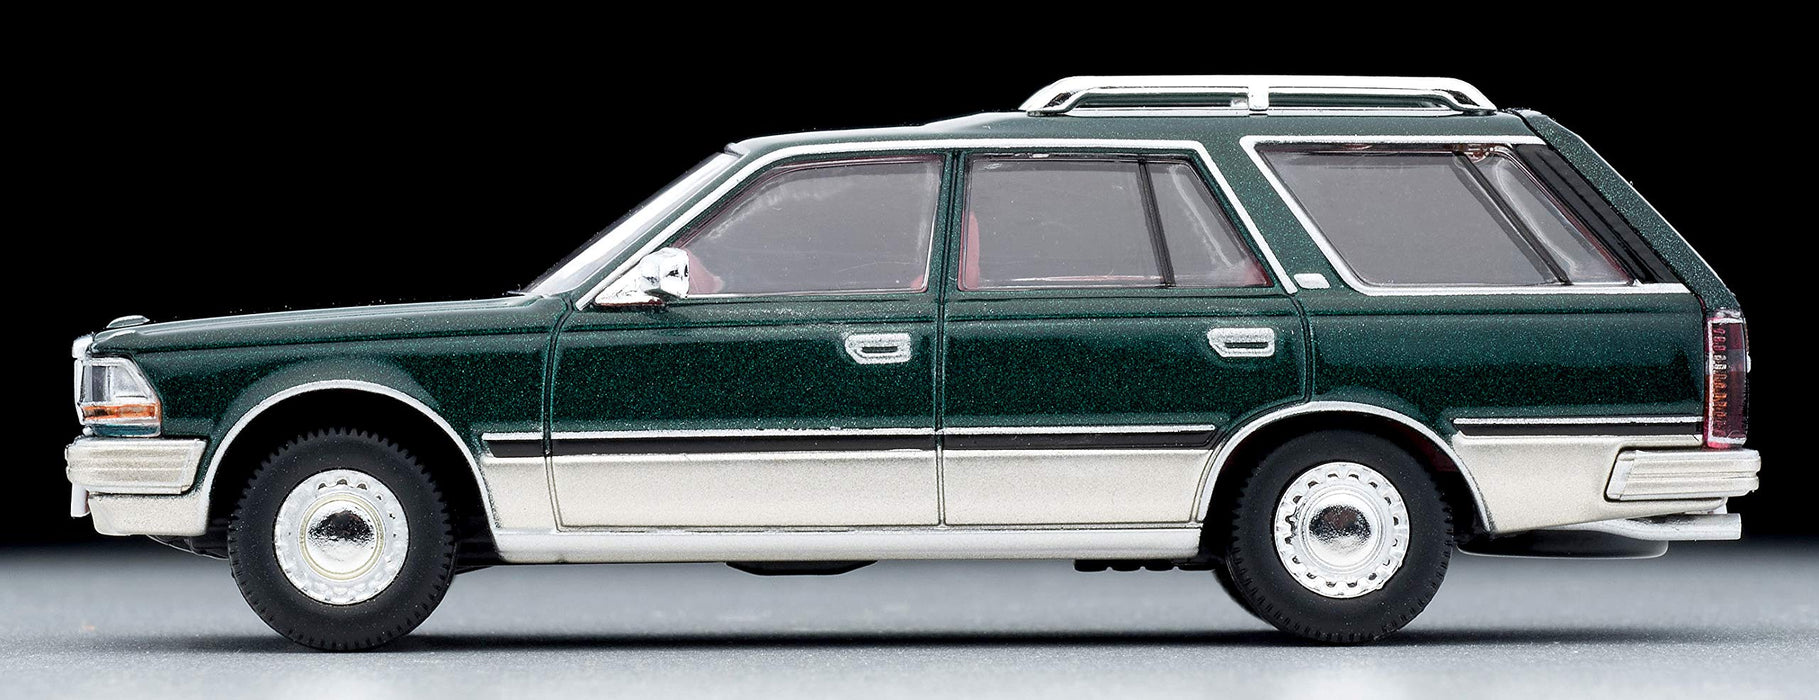 Tomytec Tomica Limited Vintage Neo 1/64 Lv-N209B Nissan Cedric Wagon V20E Sgl Limited Green/Silver Finished Product 311911